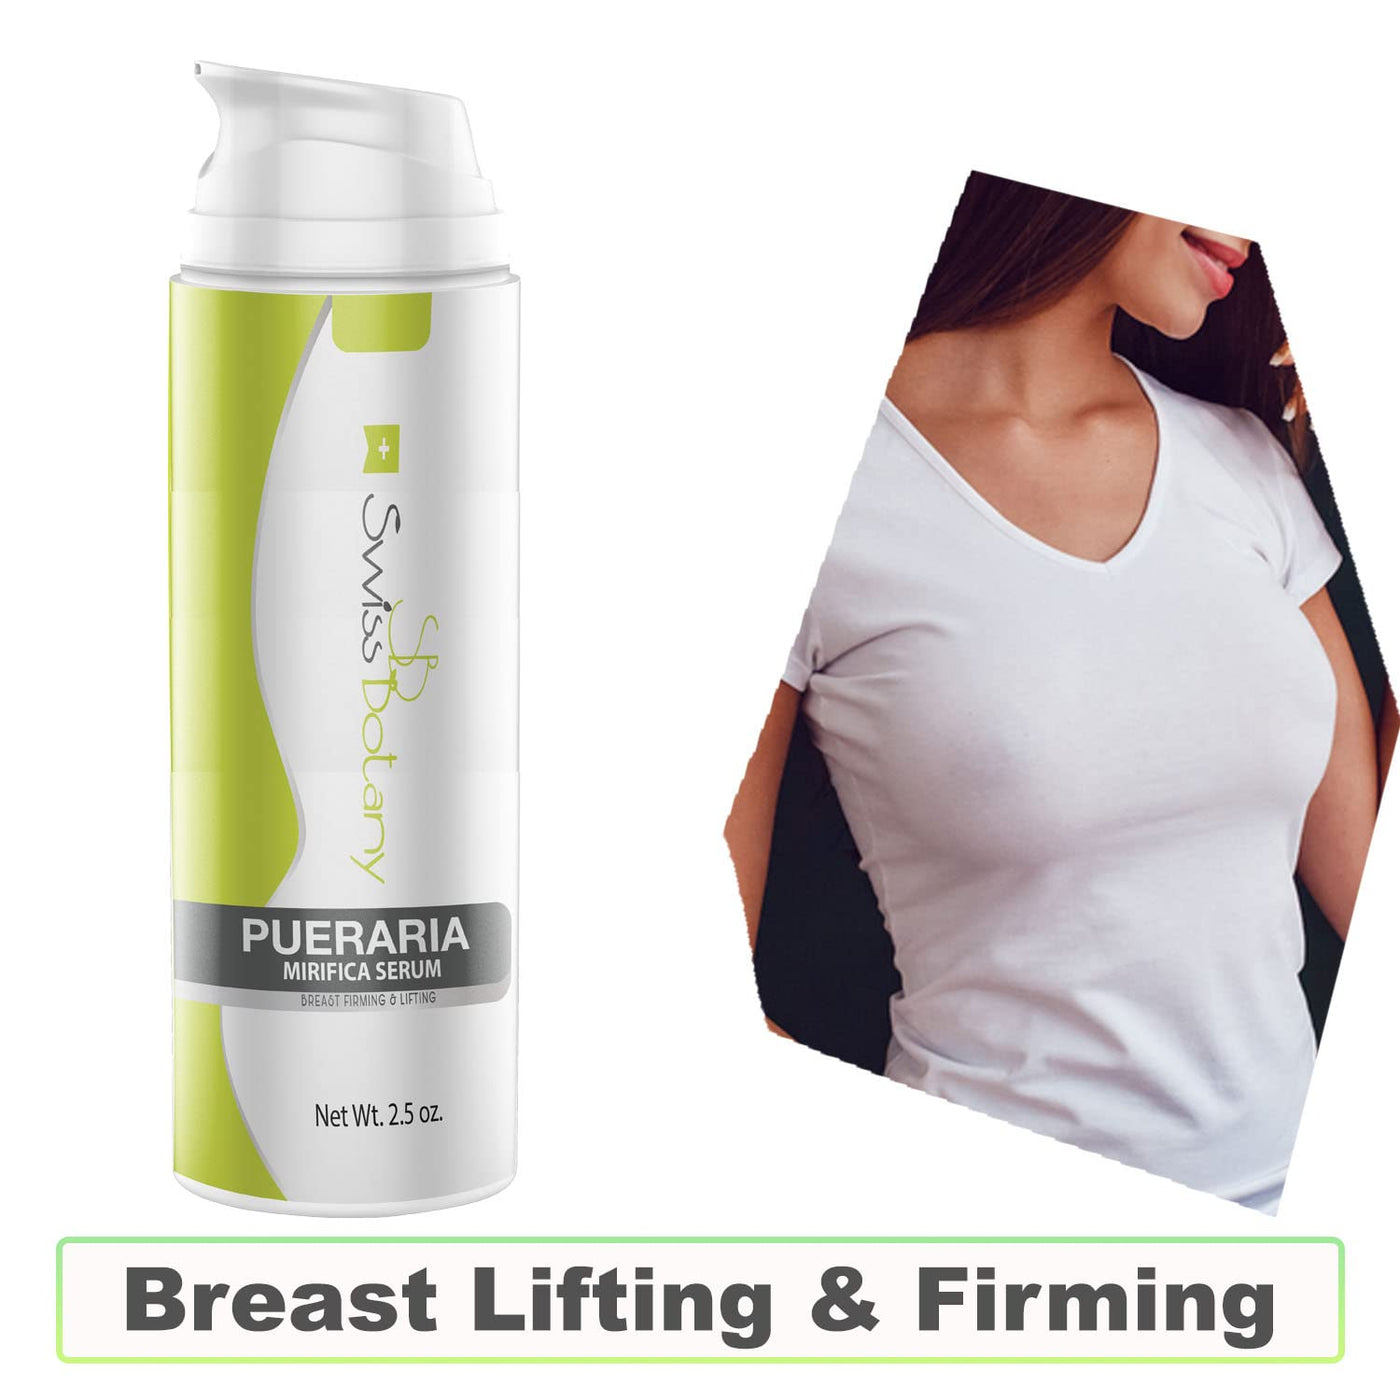 Swiss Botany Beauty 2.5 Ounce Pueraria Mirifica Bust Firming & Lifting Serum for Women and Men, Easy to Apply, Use Twice a Day for Best Results | Premium Made by Swiss Botany, 2.5 ounce